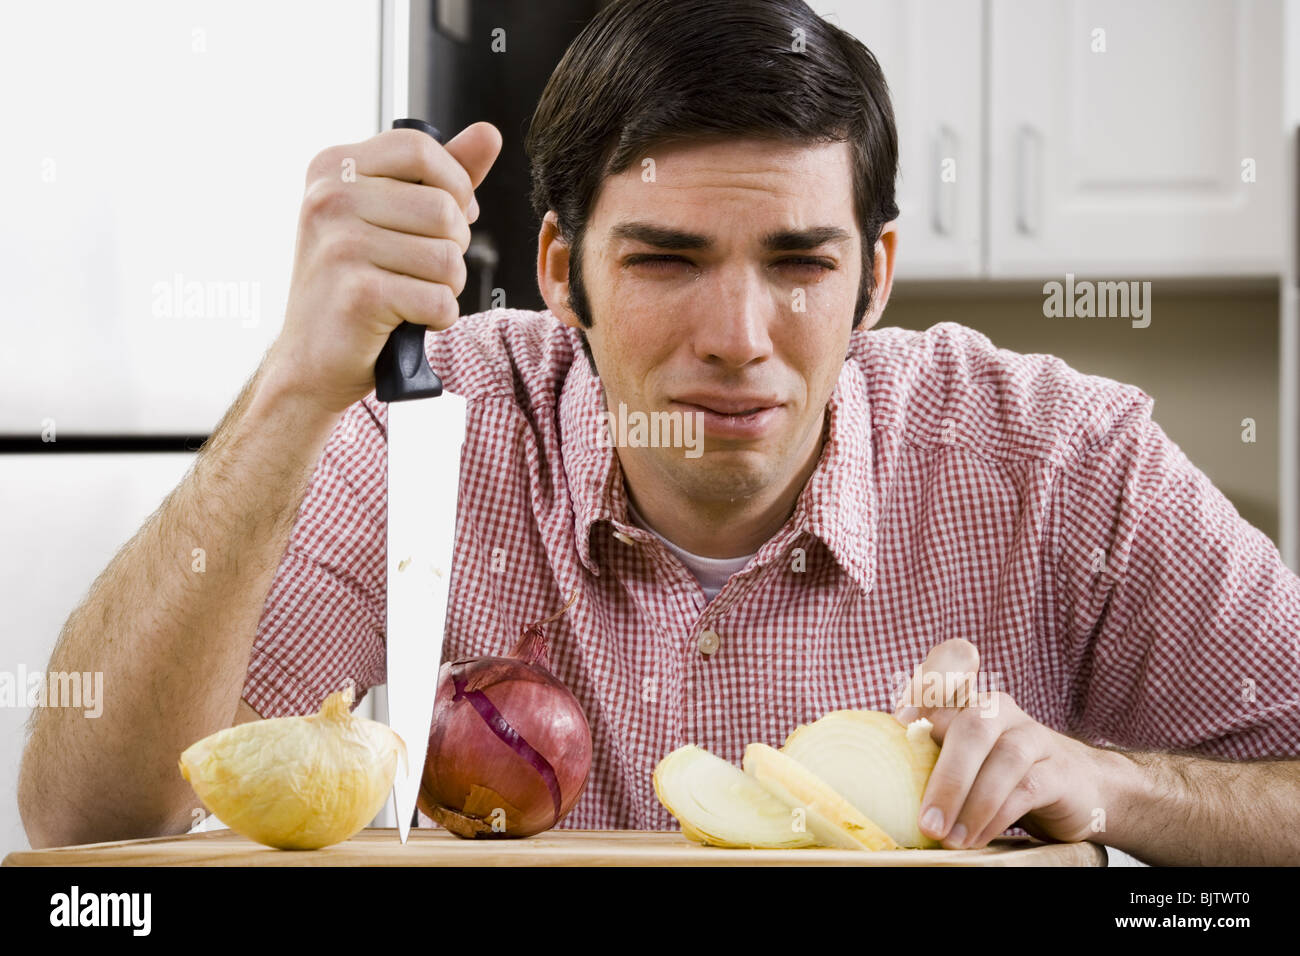 Man slicing onion and crying Stock Photo